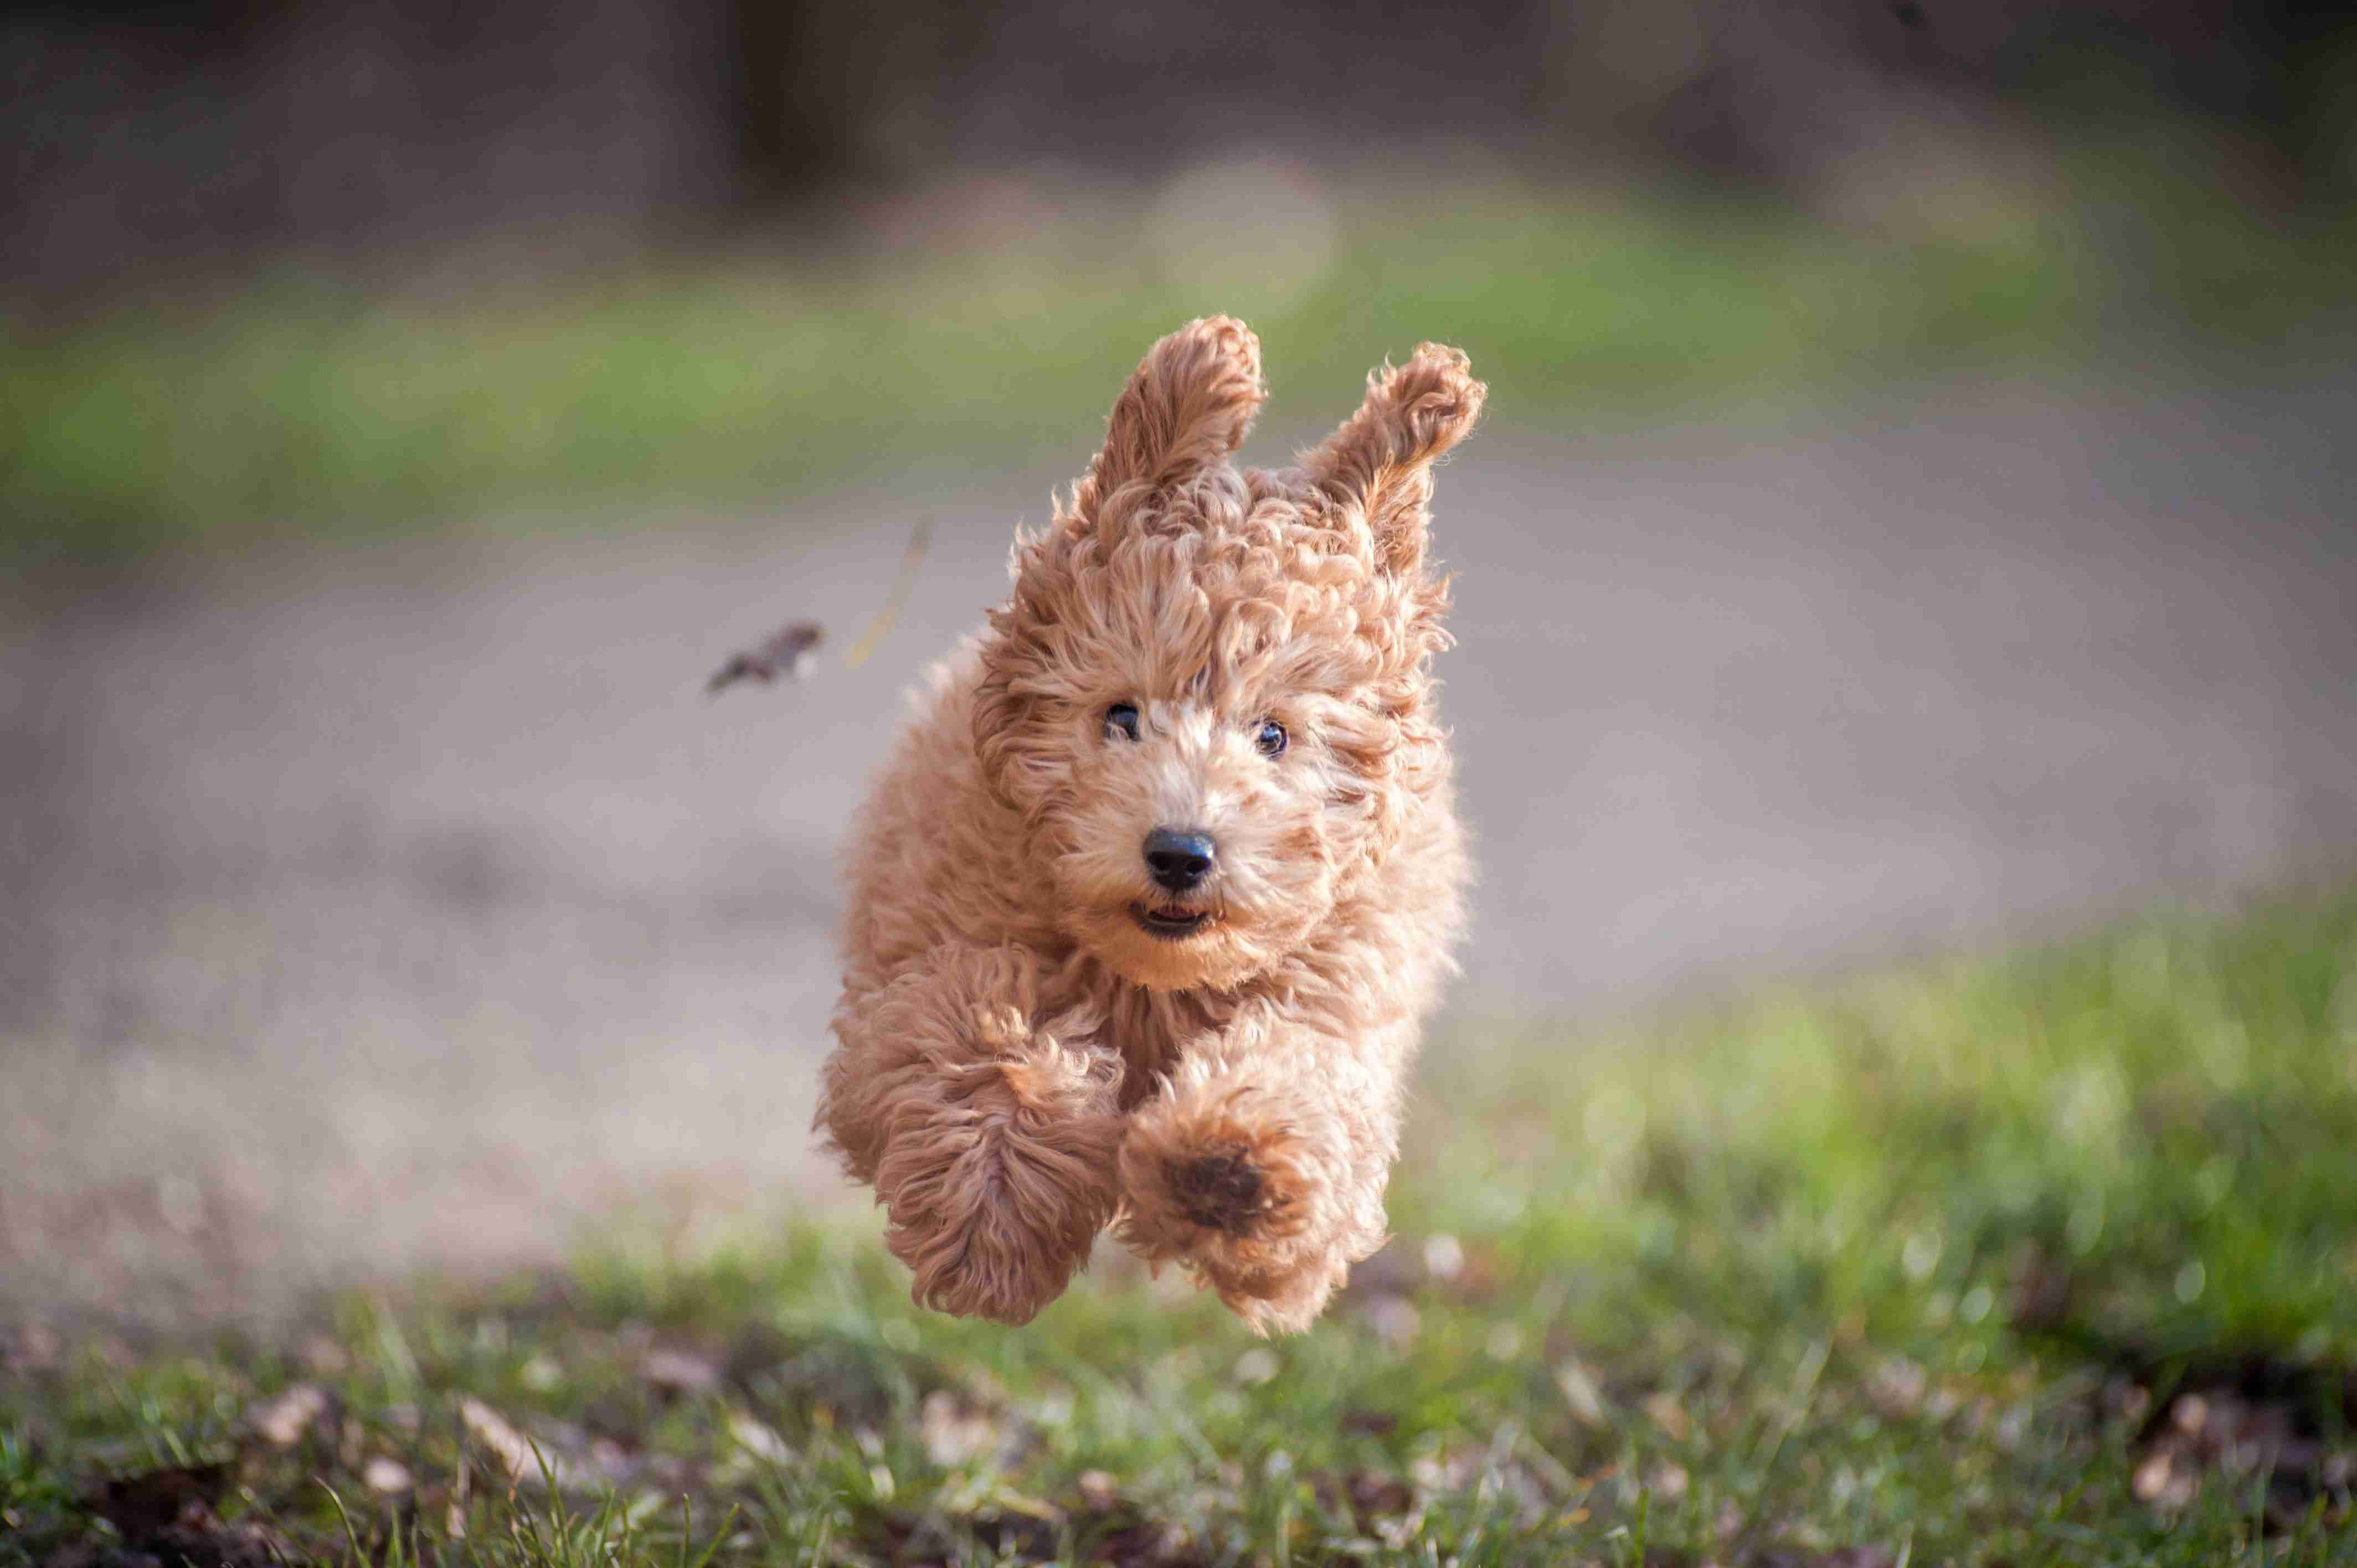 How can owners prevent and treat eye infections in Poodles?